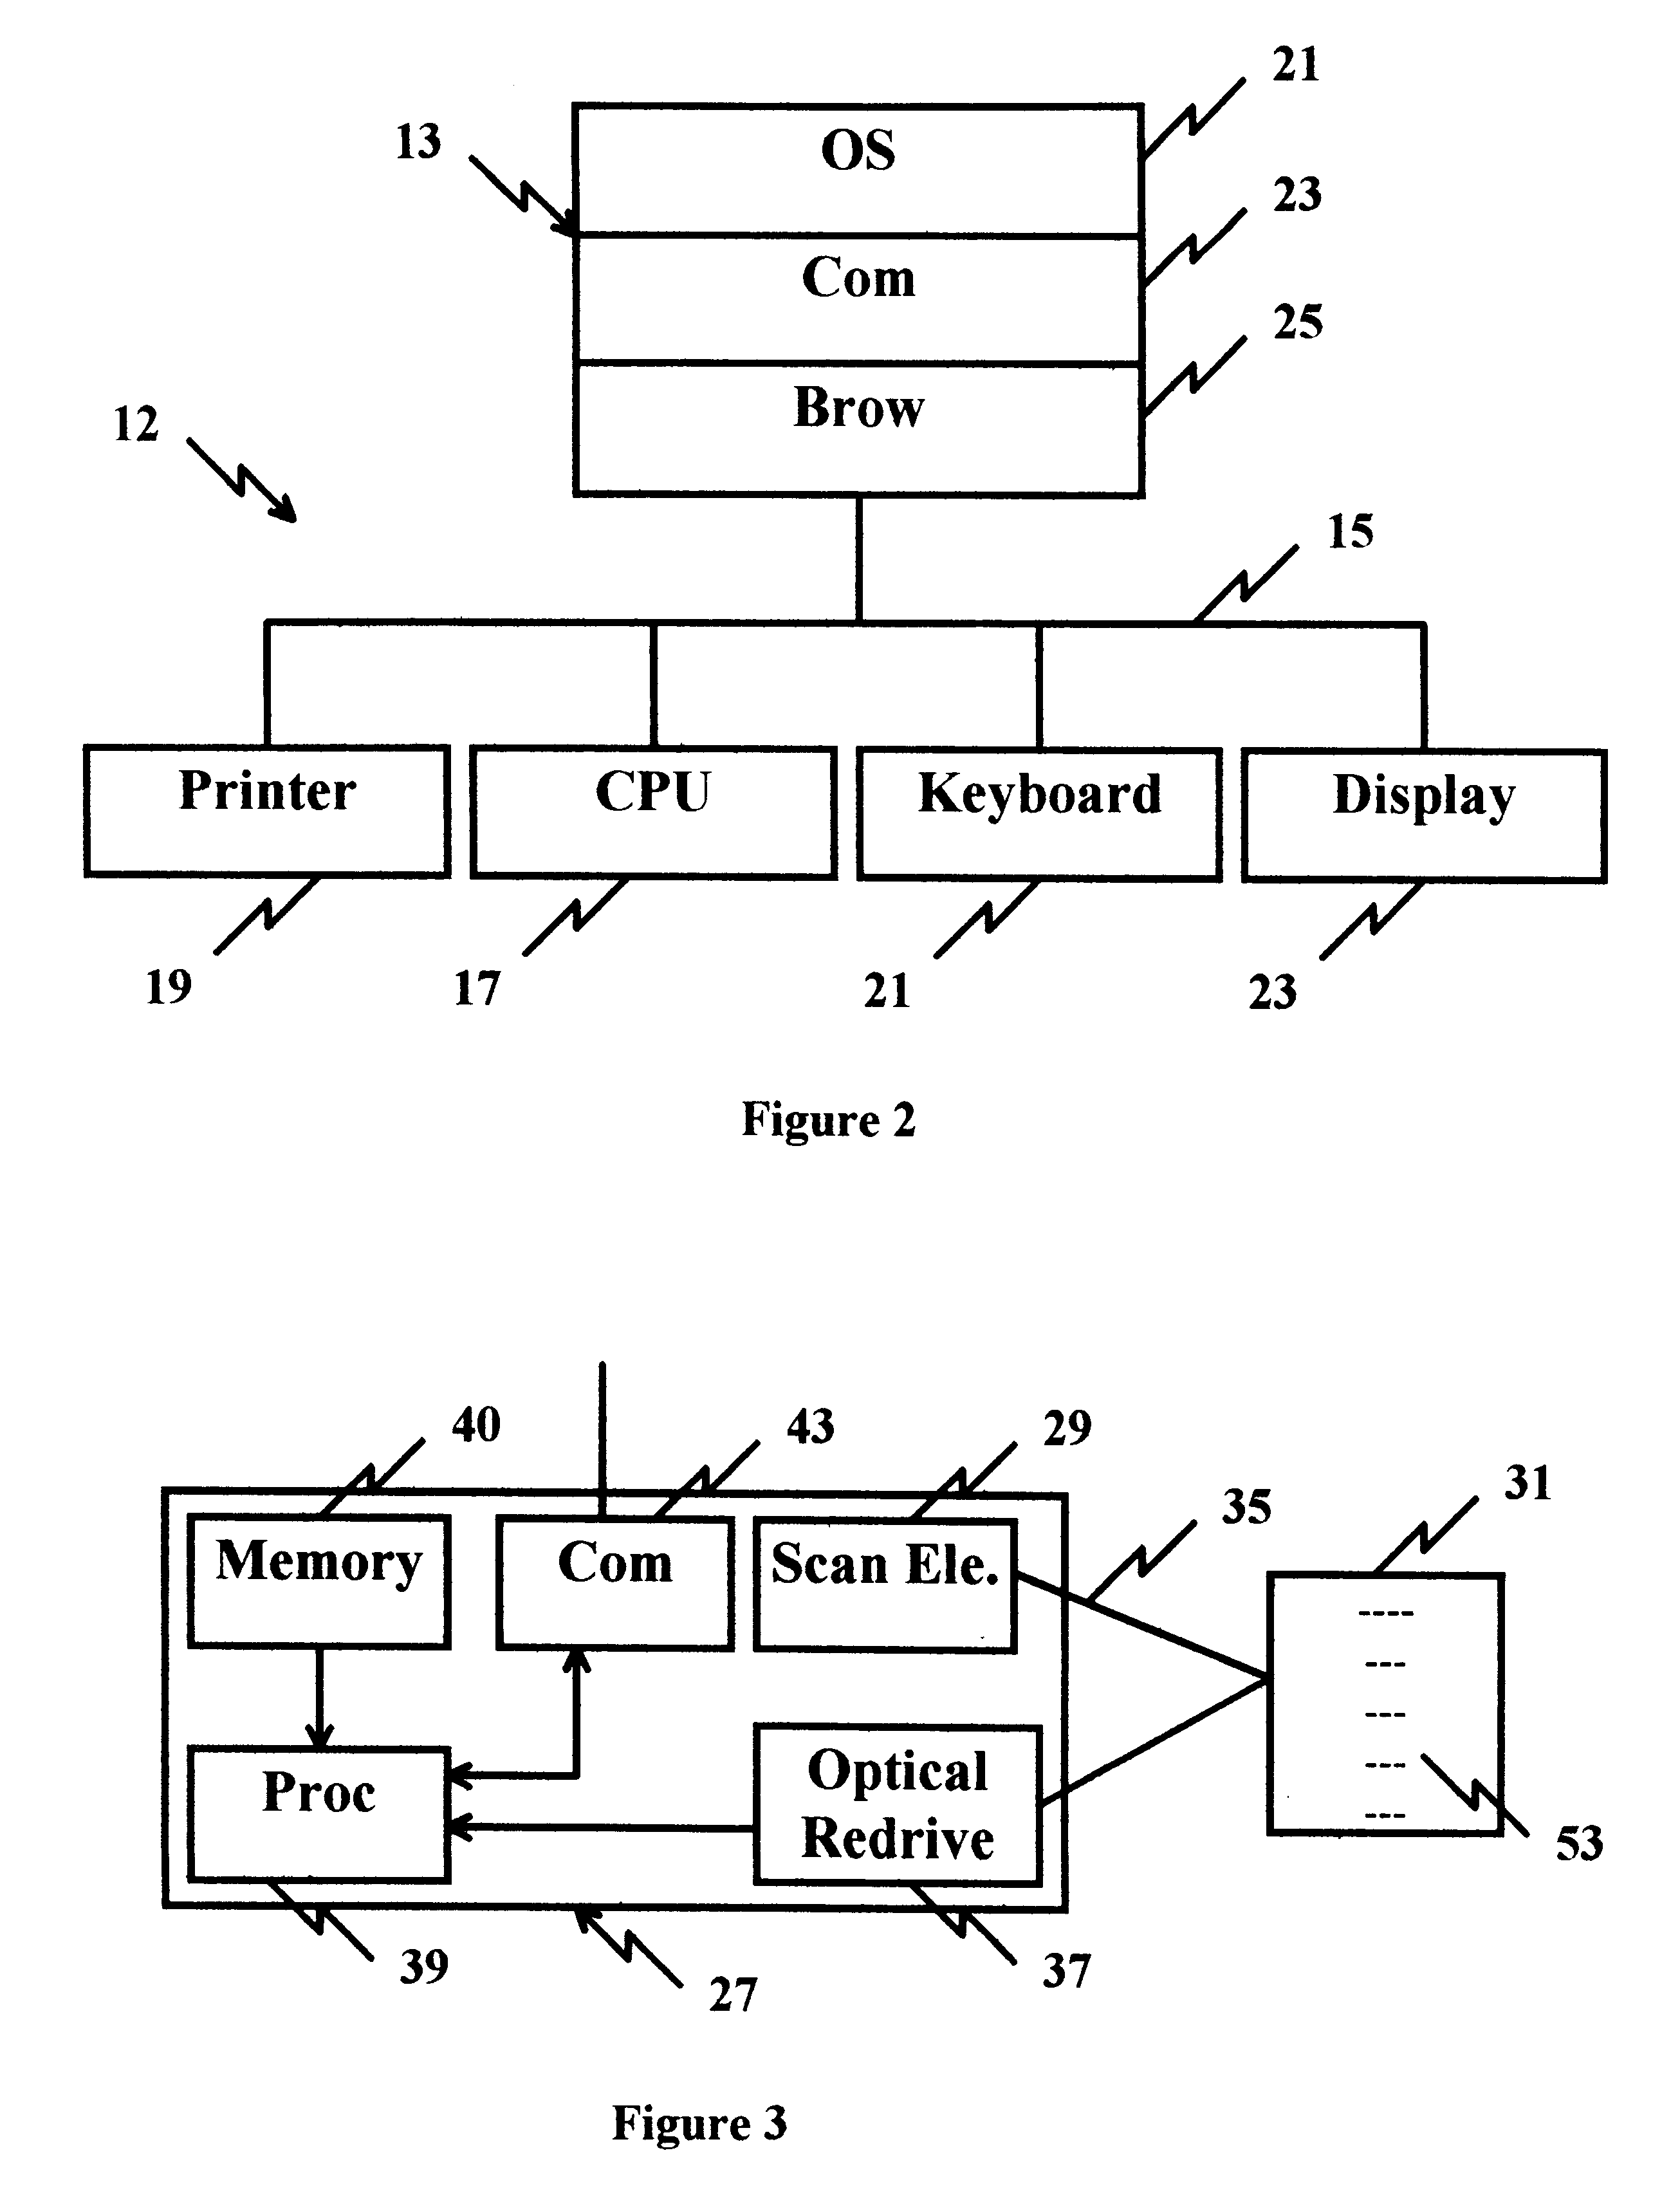 Cryptographic encoded ticket issuing and collection system for remote purchasers